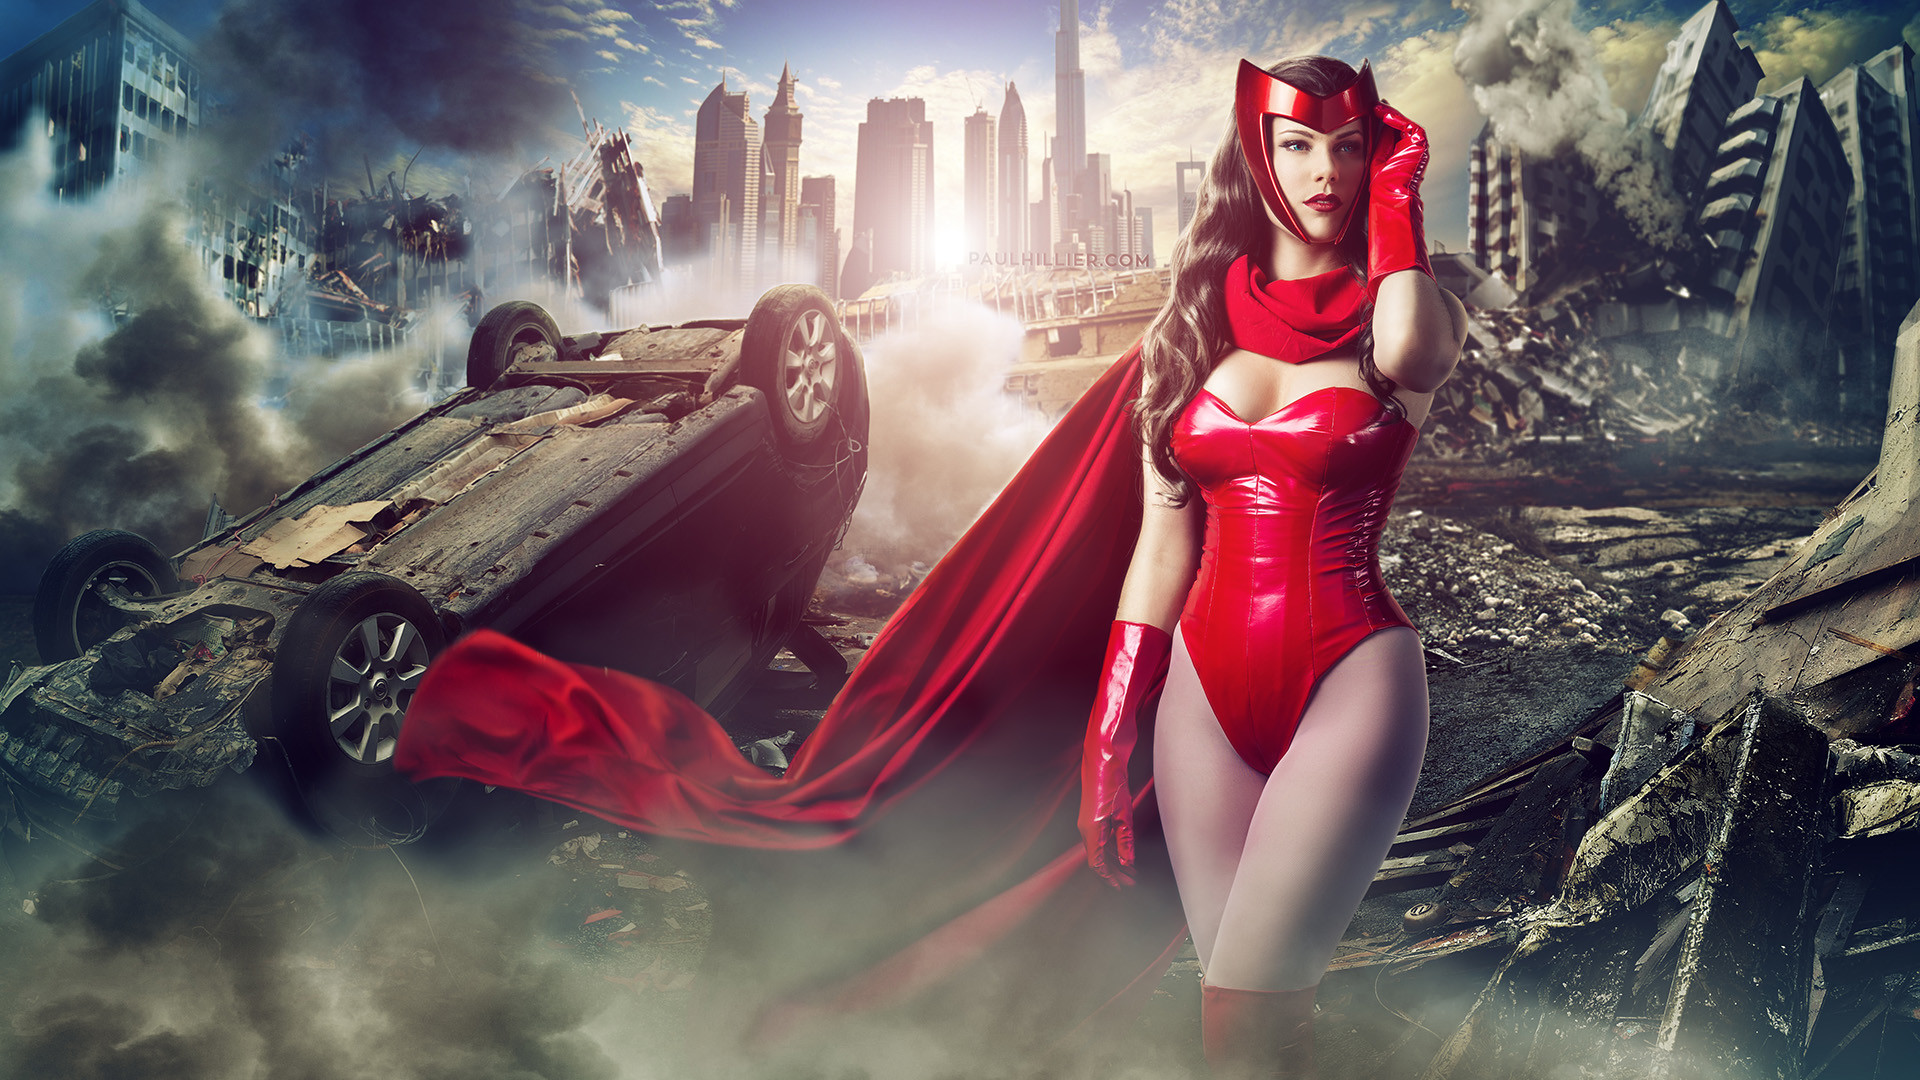 1920x1080 Character: Scarlet Witch (Wanda Maximoff) / From: MARVEL Comics 'Avengers'